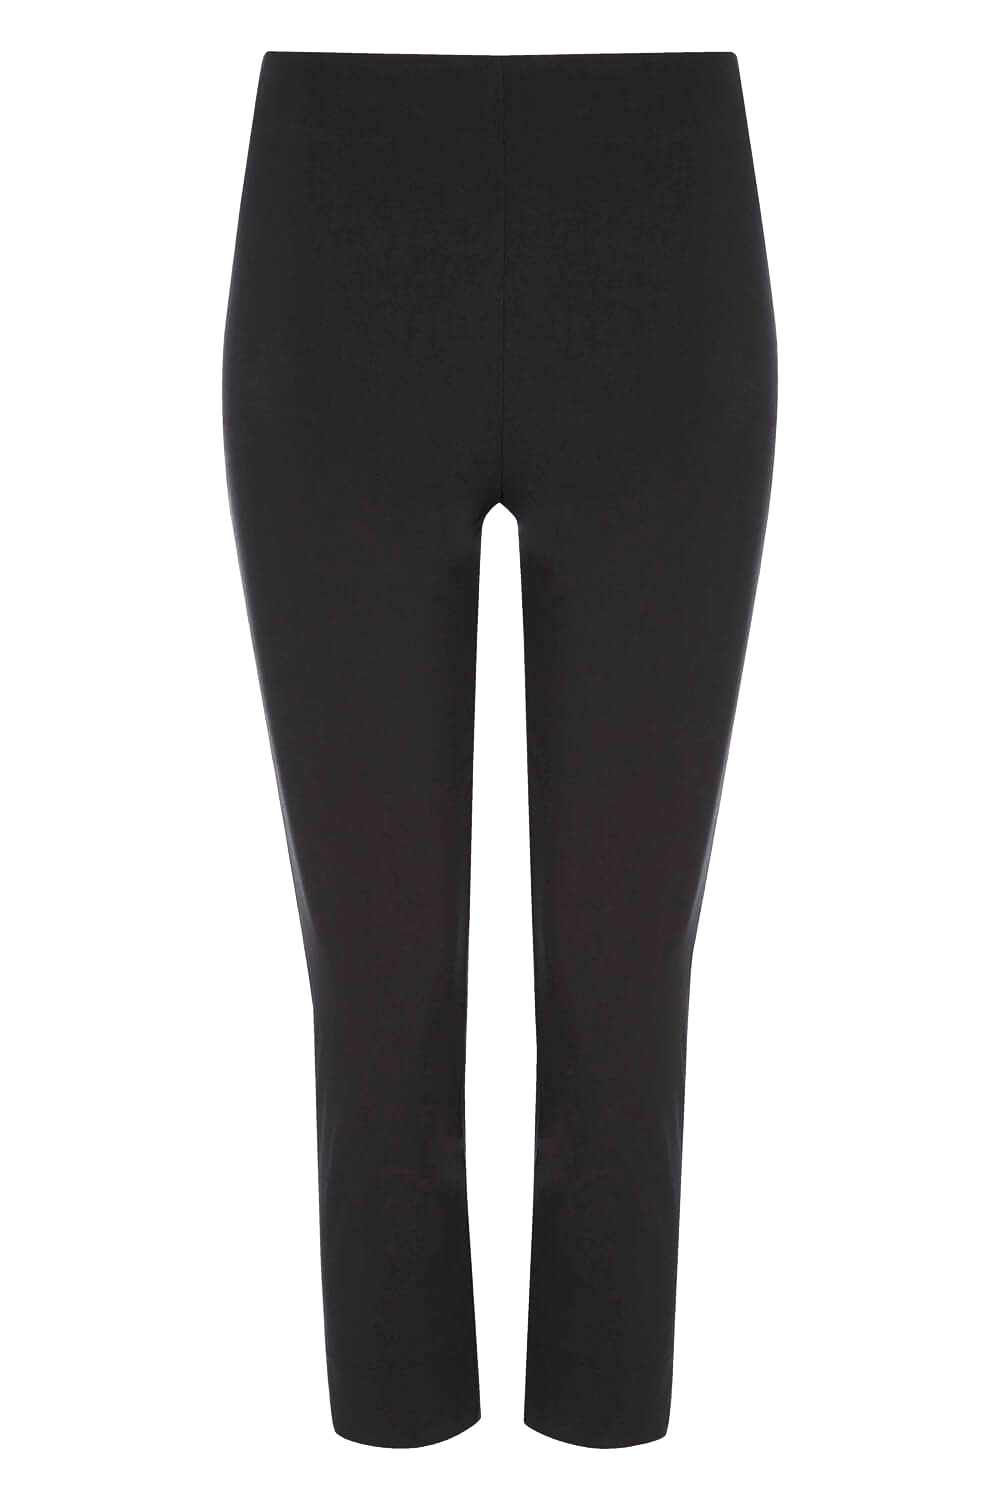 Black Cropped Stretch Trousers, Image 3 of 3